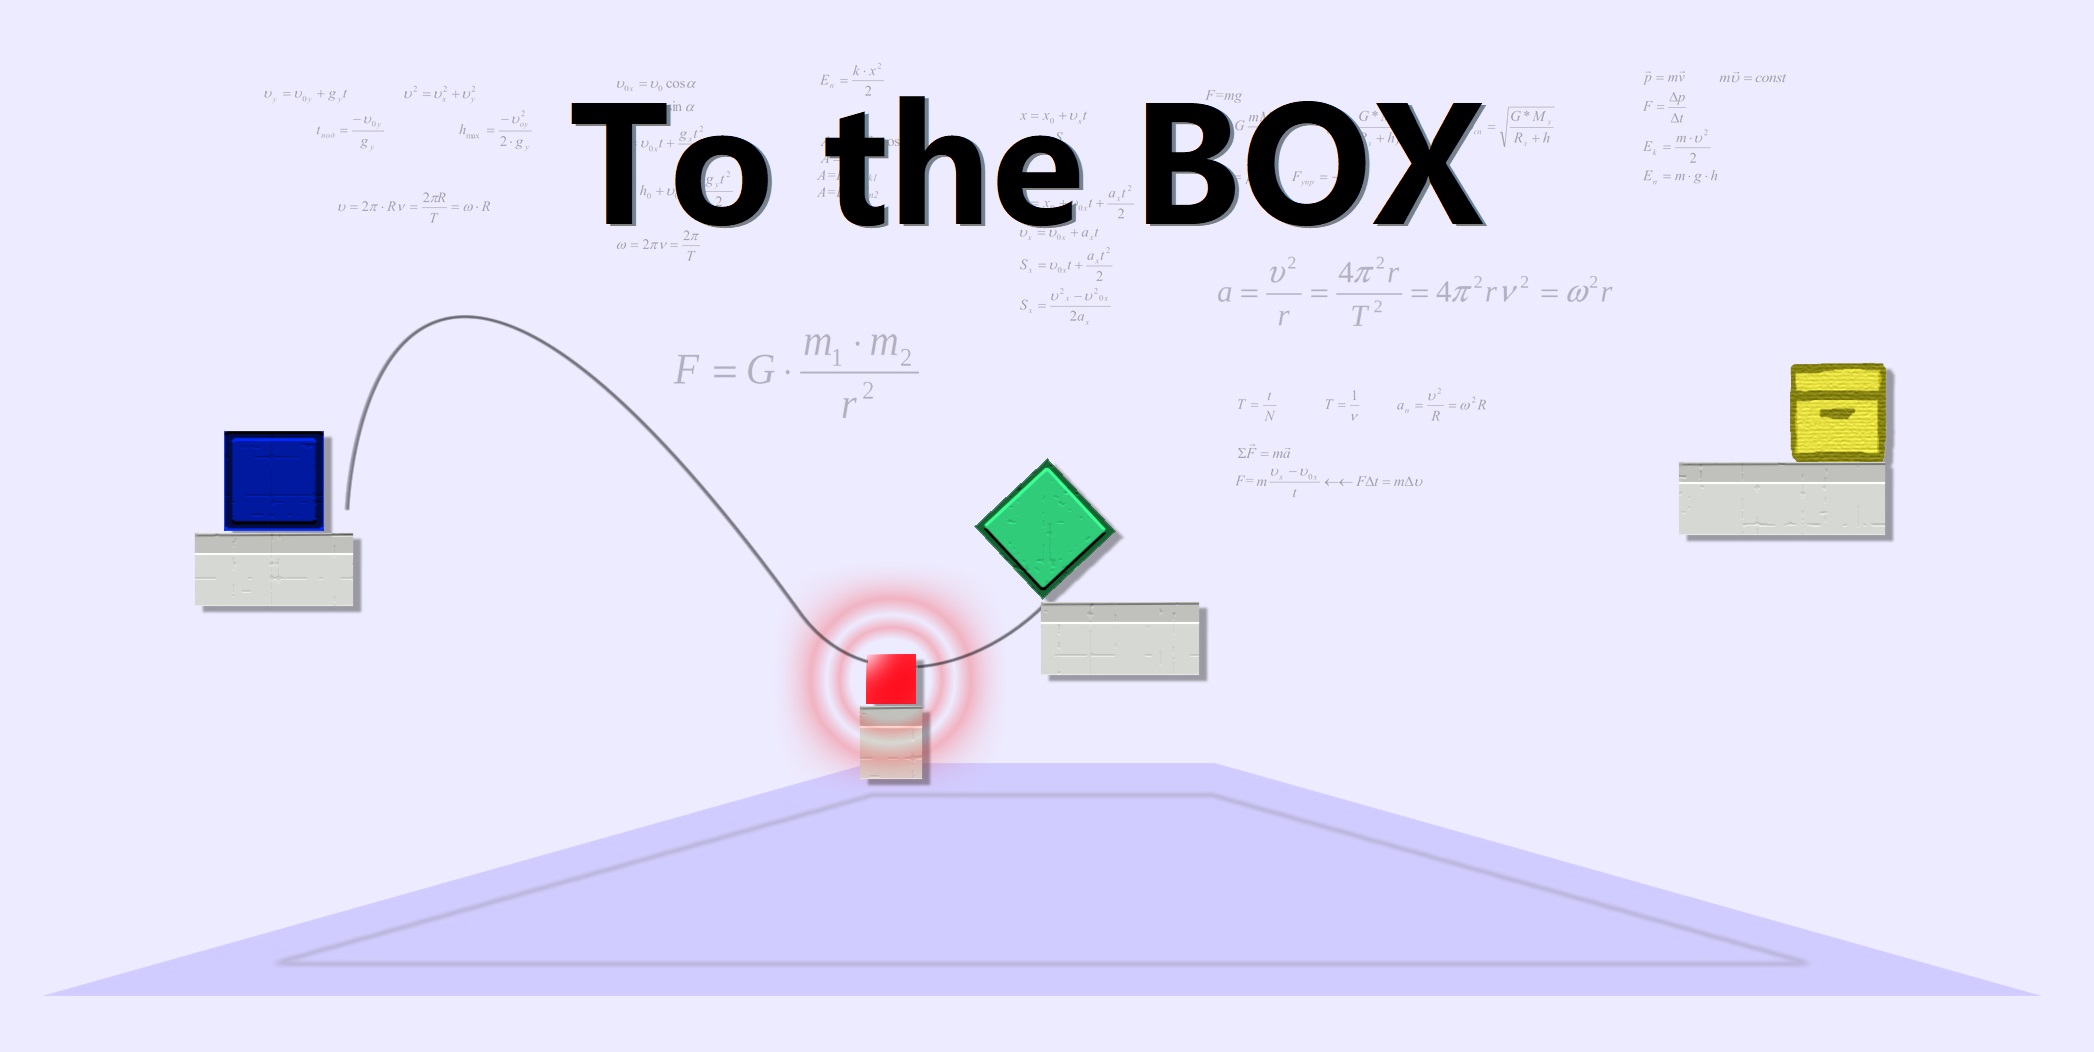 To the BOX